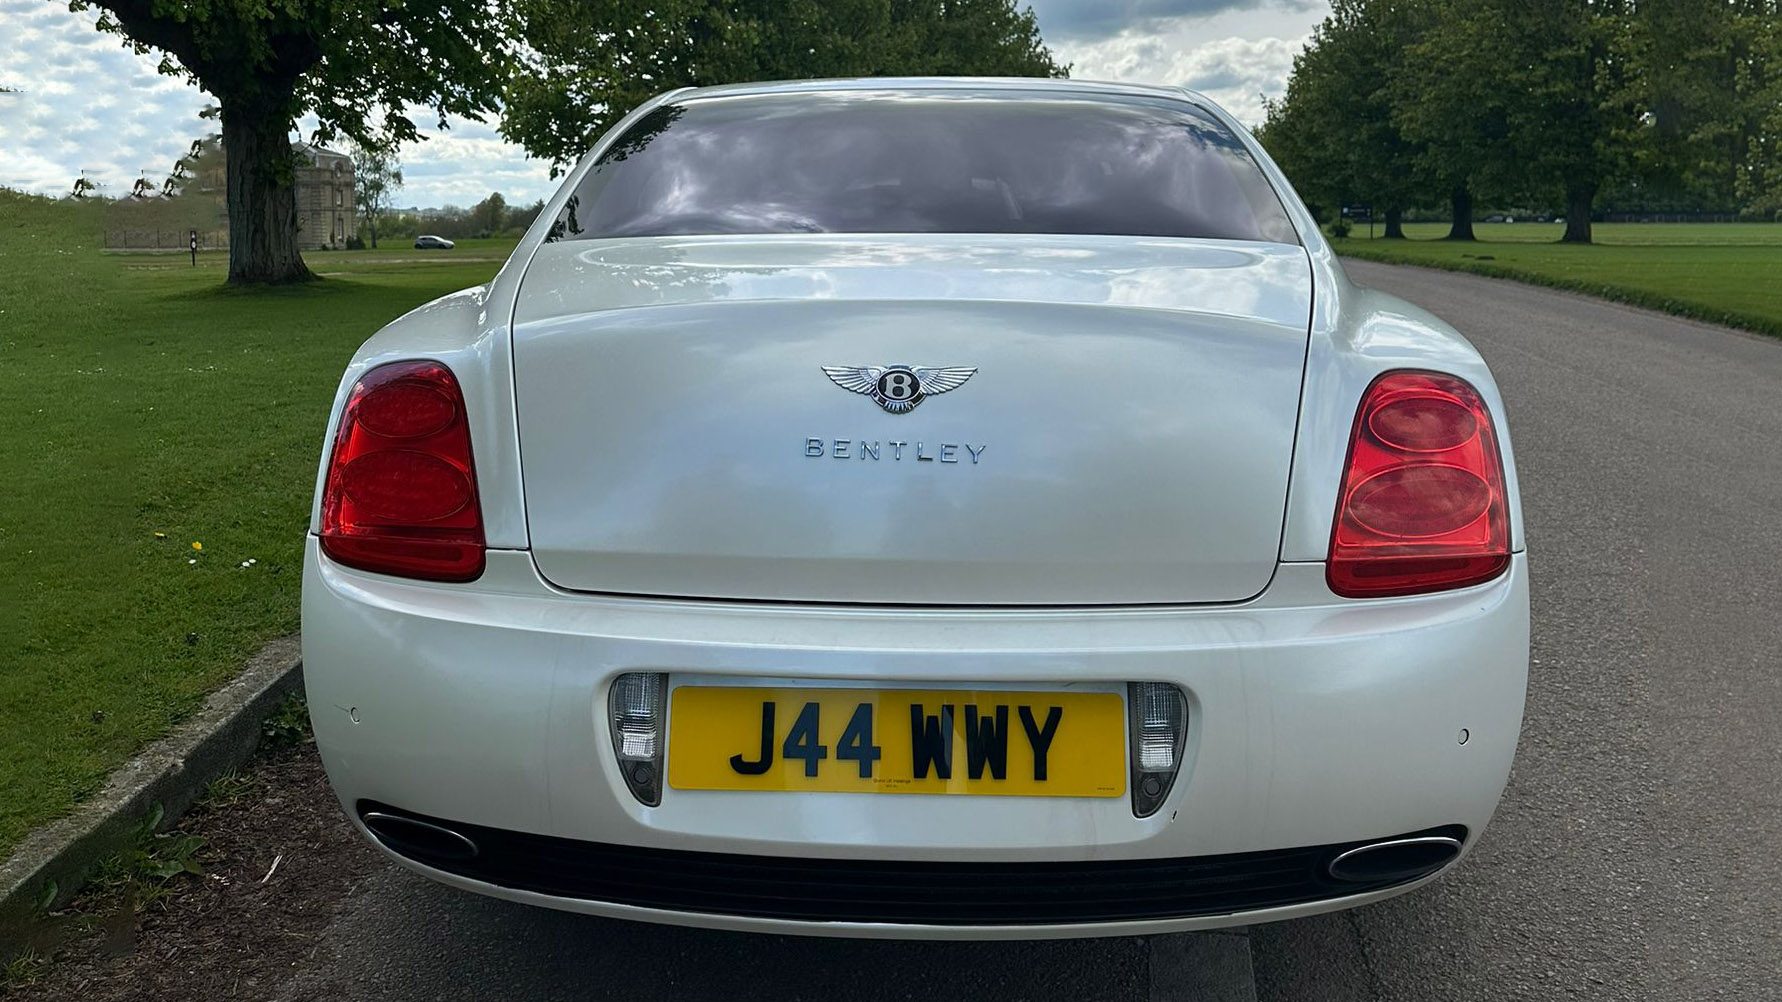 Rear view of White Bentley